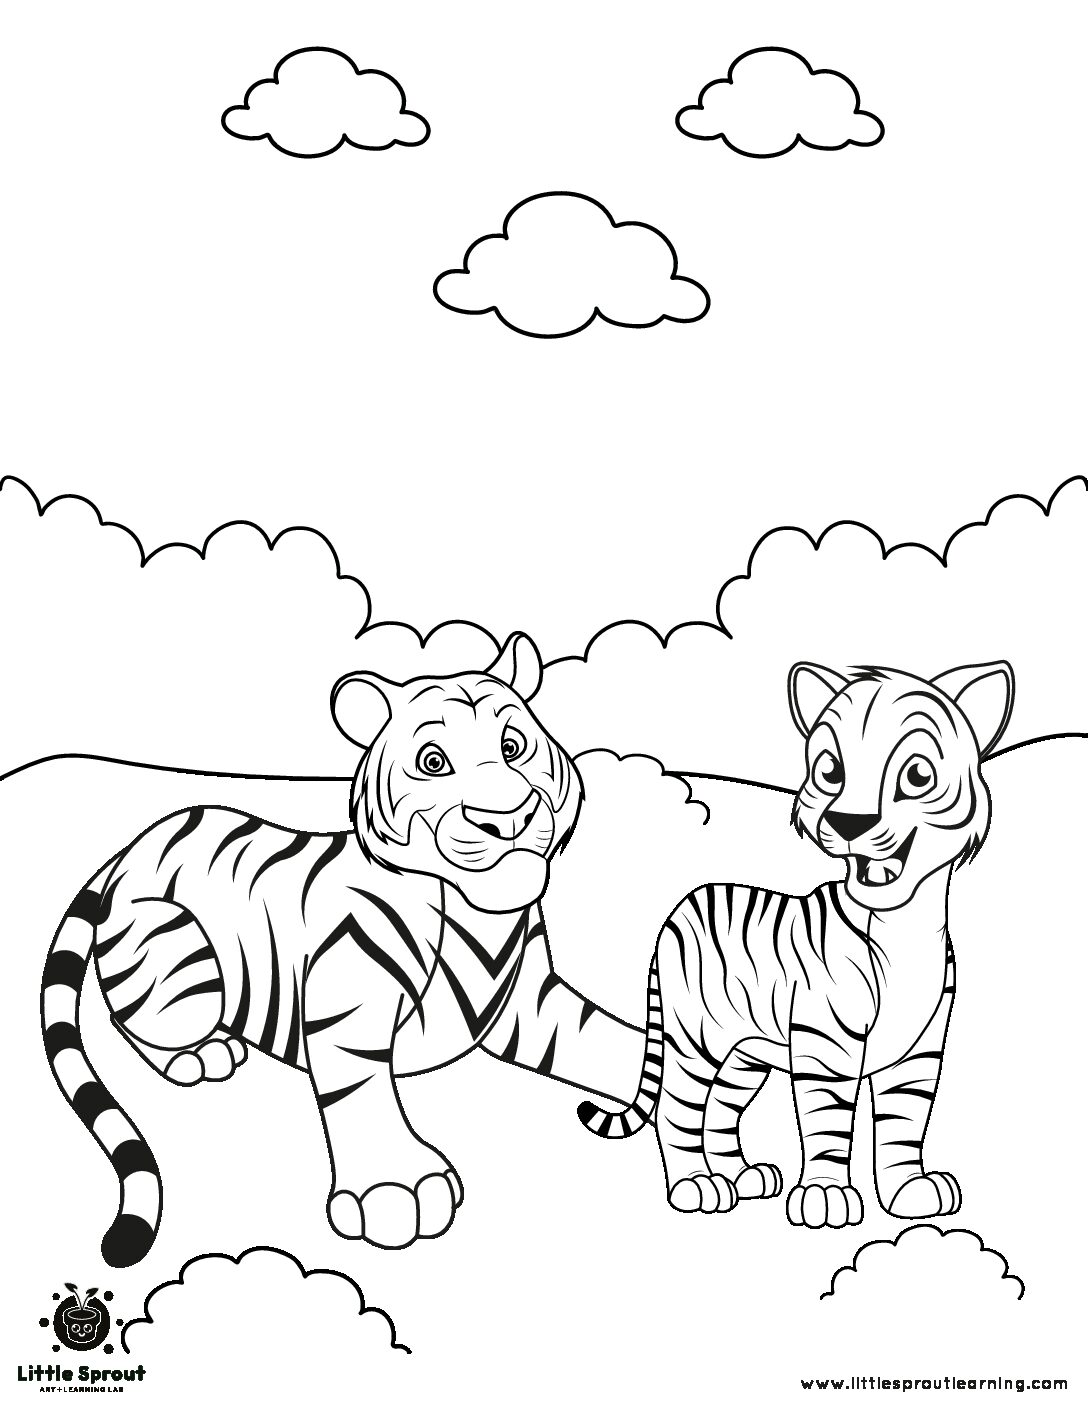 Relaxing Tiger Coloring Page